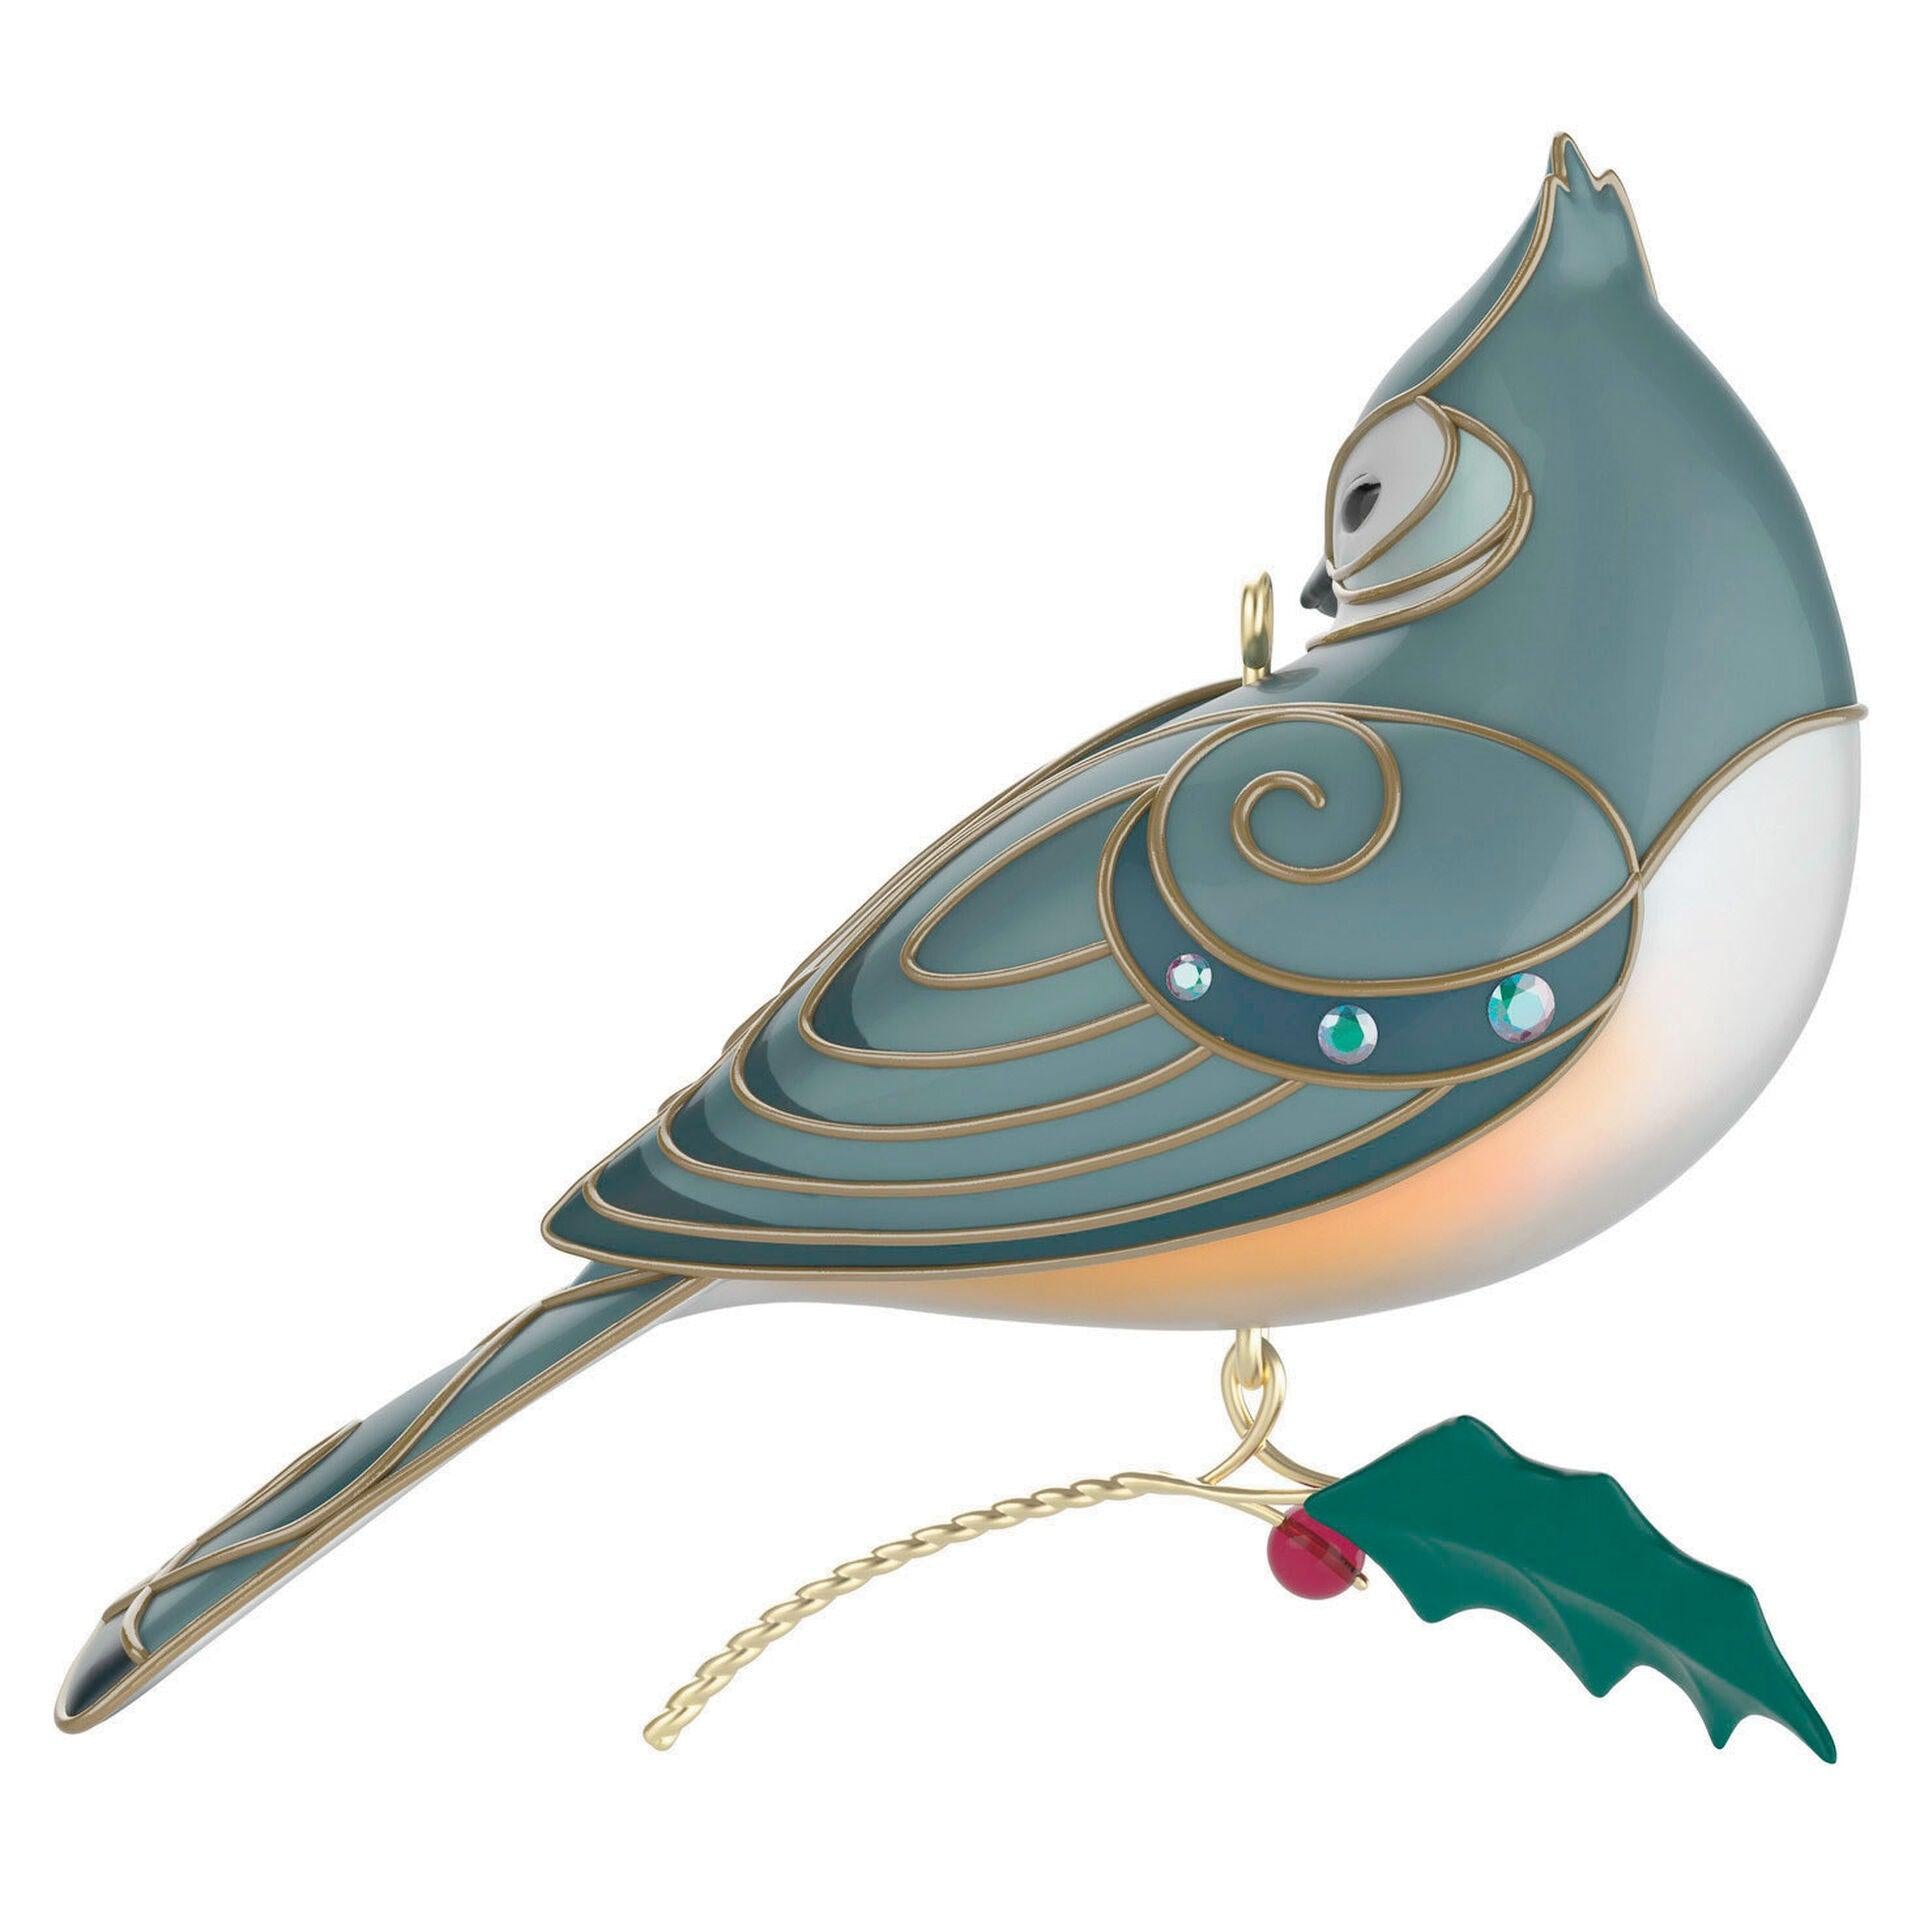 The Beauty of Birds Lady Tufted Titmouse Ornament